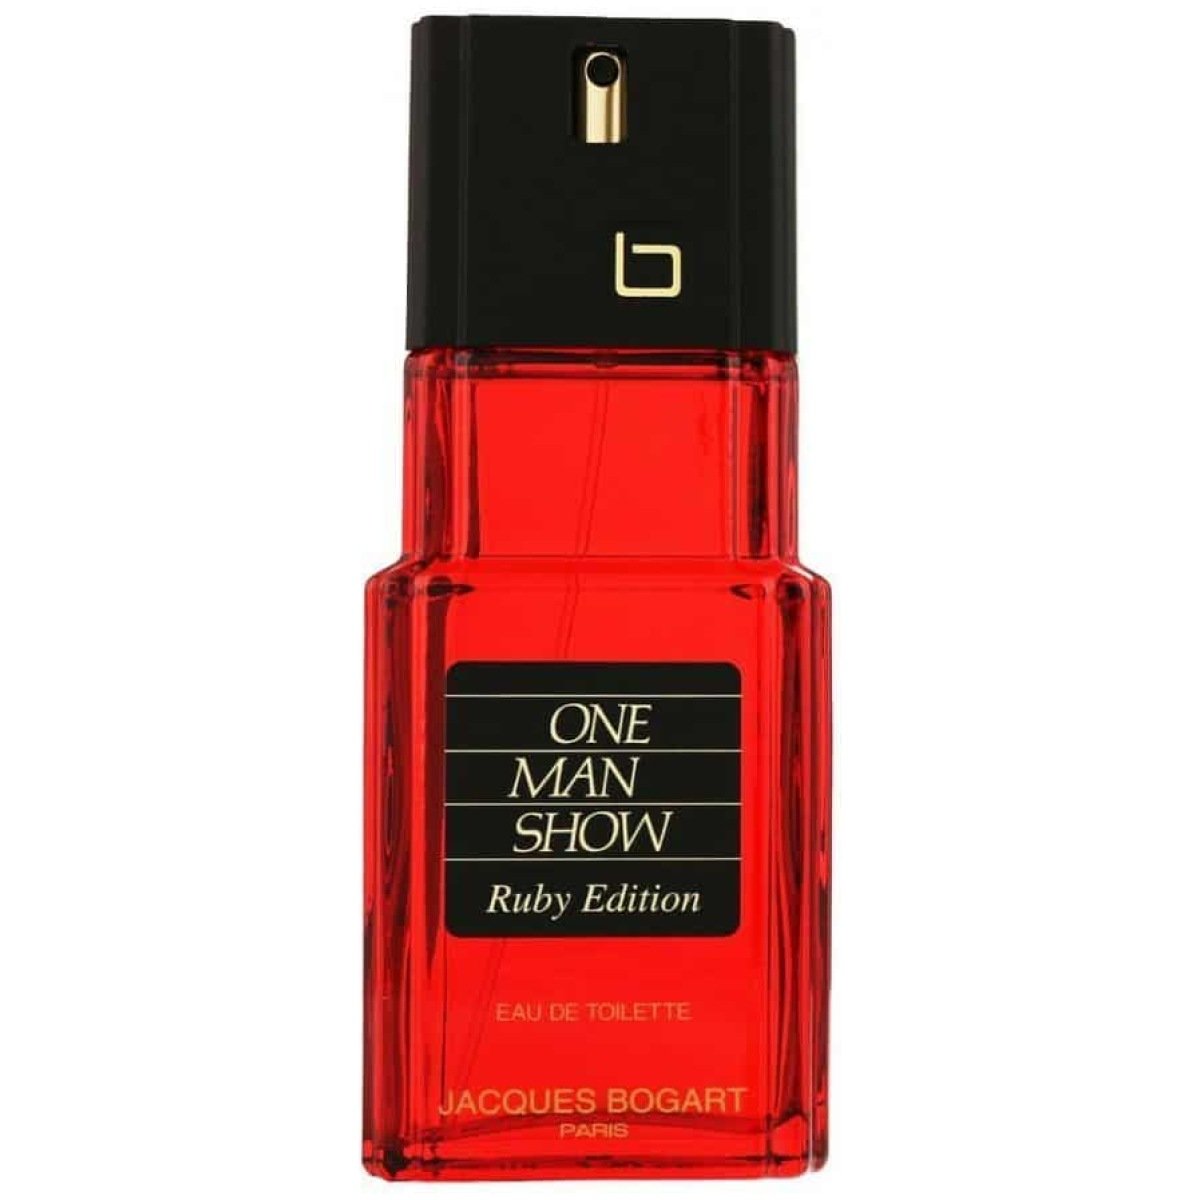 Jacques Bogart One Man Show Ruby Edition EDT Perfume For Men 100 ml